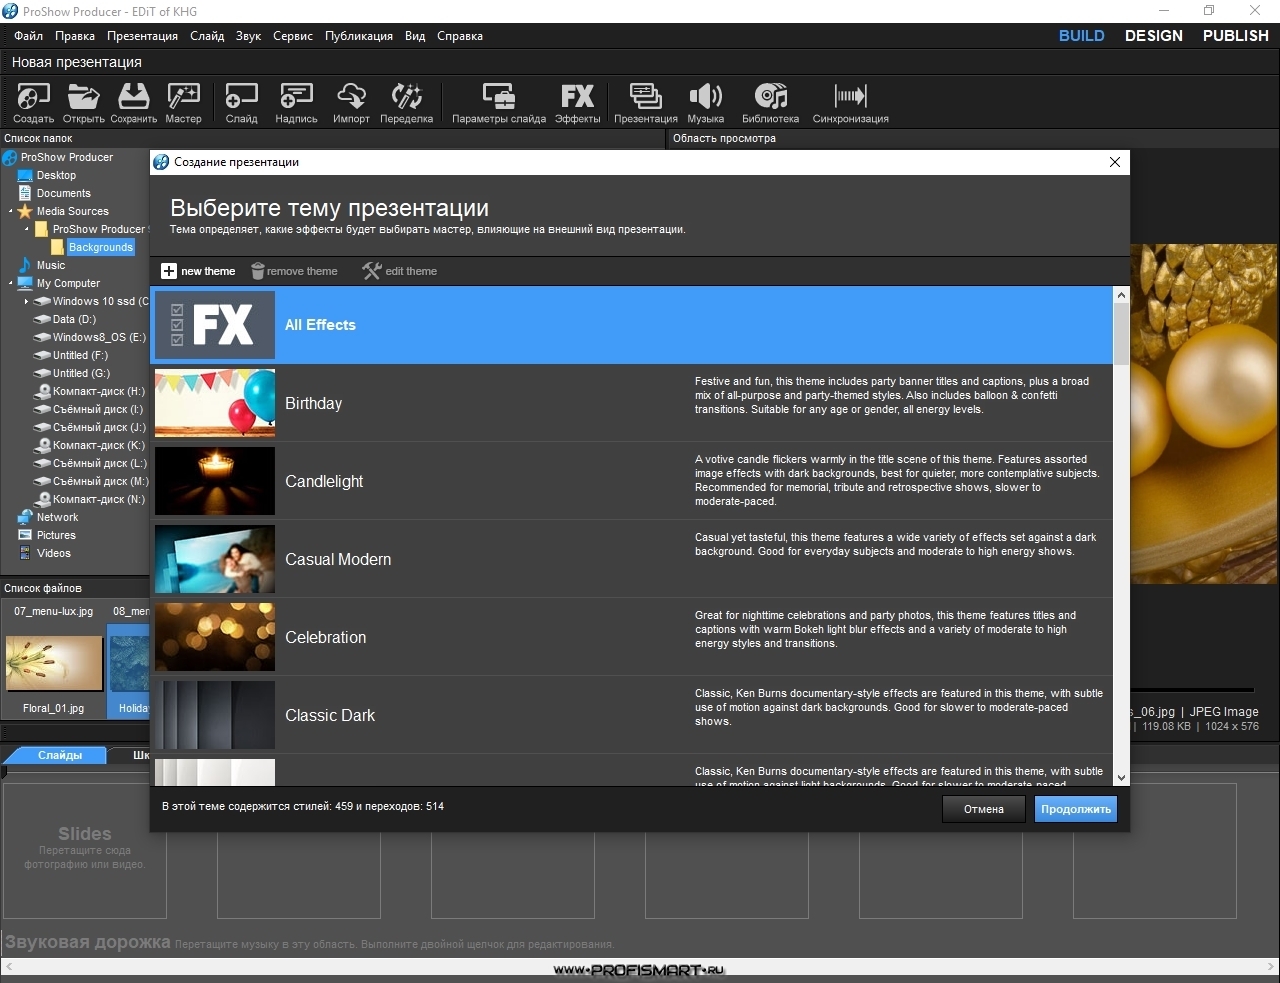 proshow producer 5.0 portable